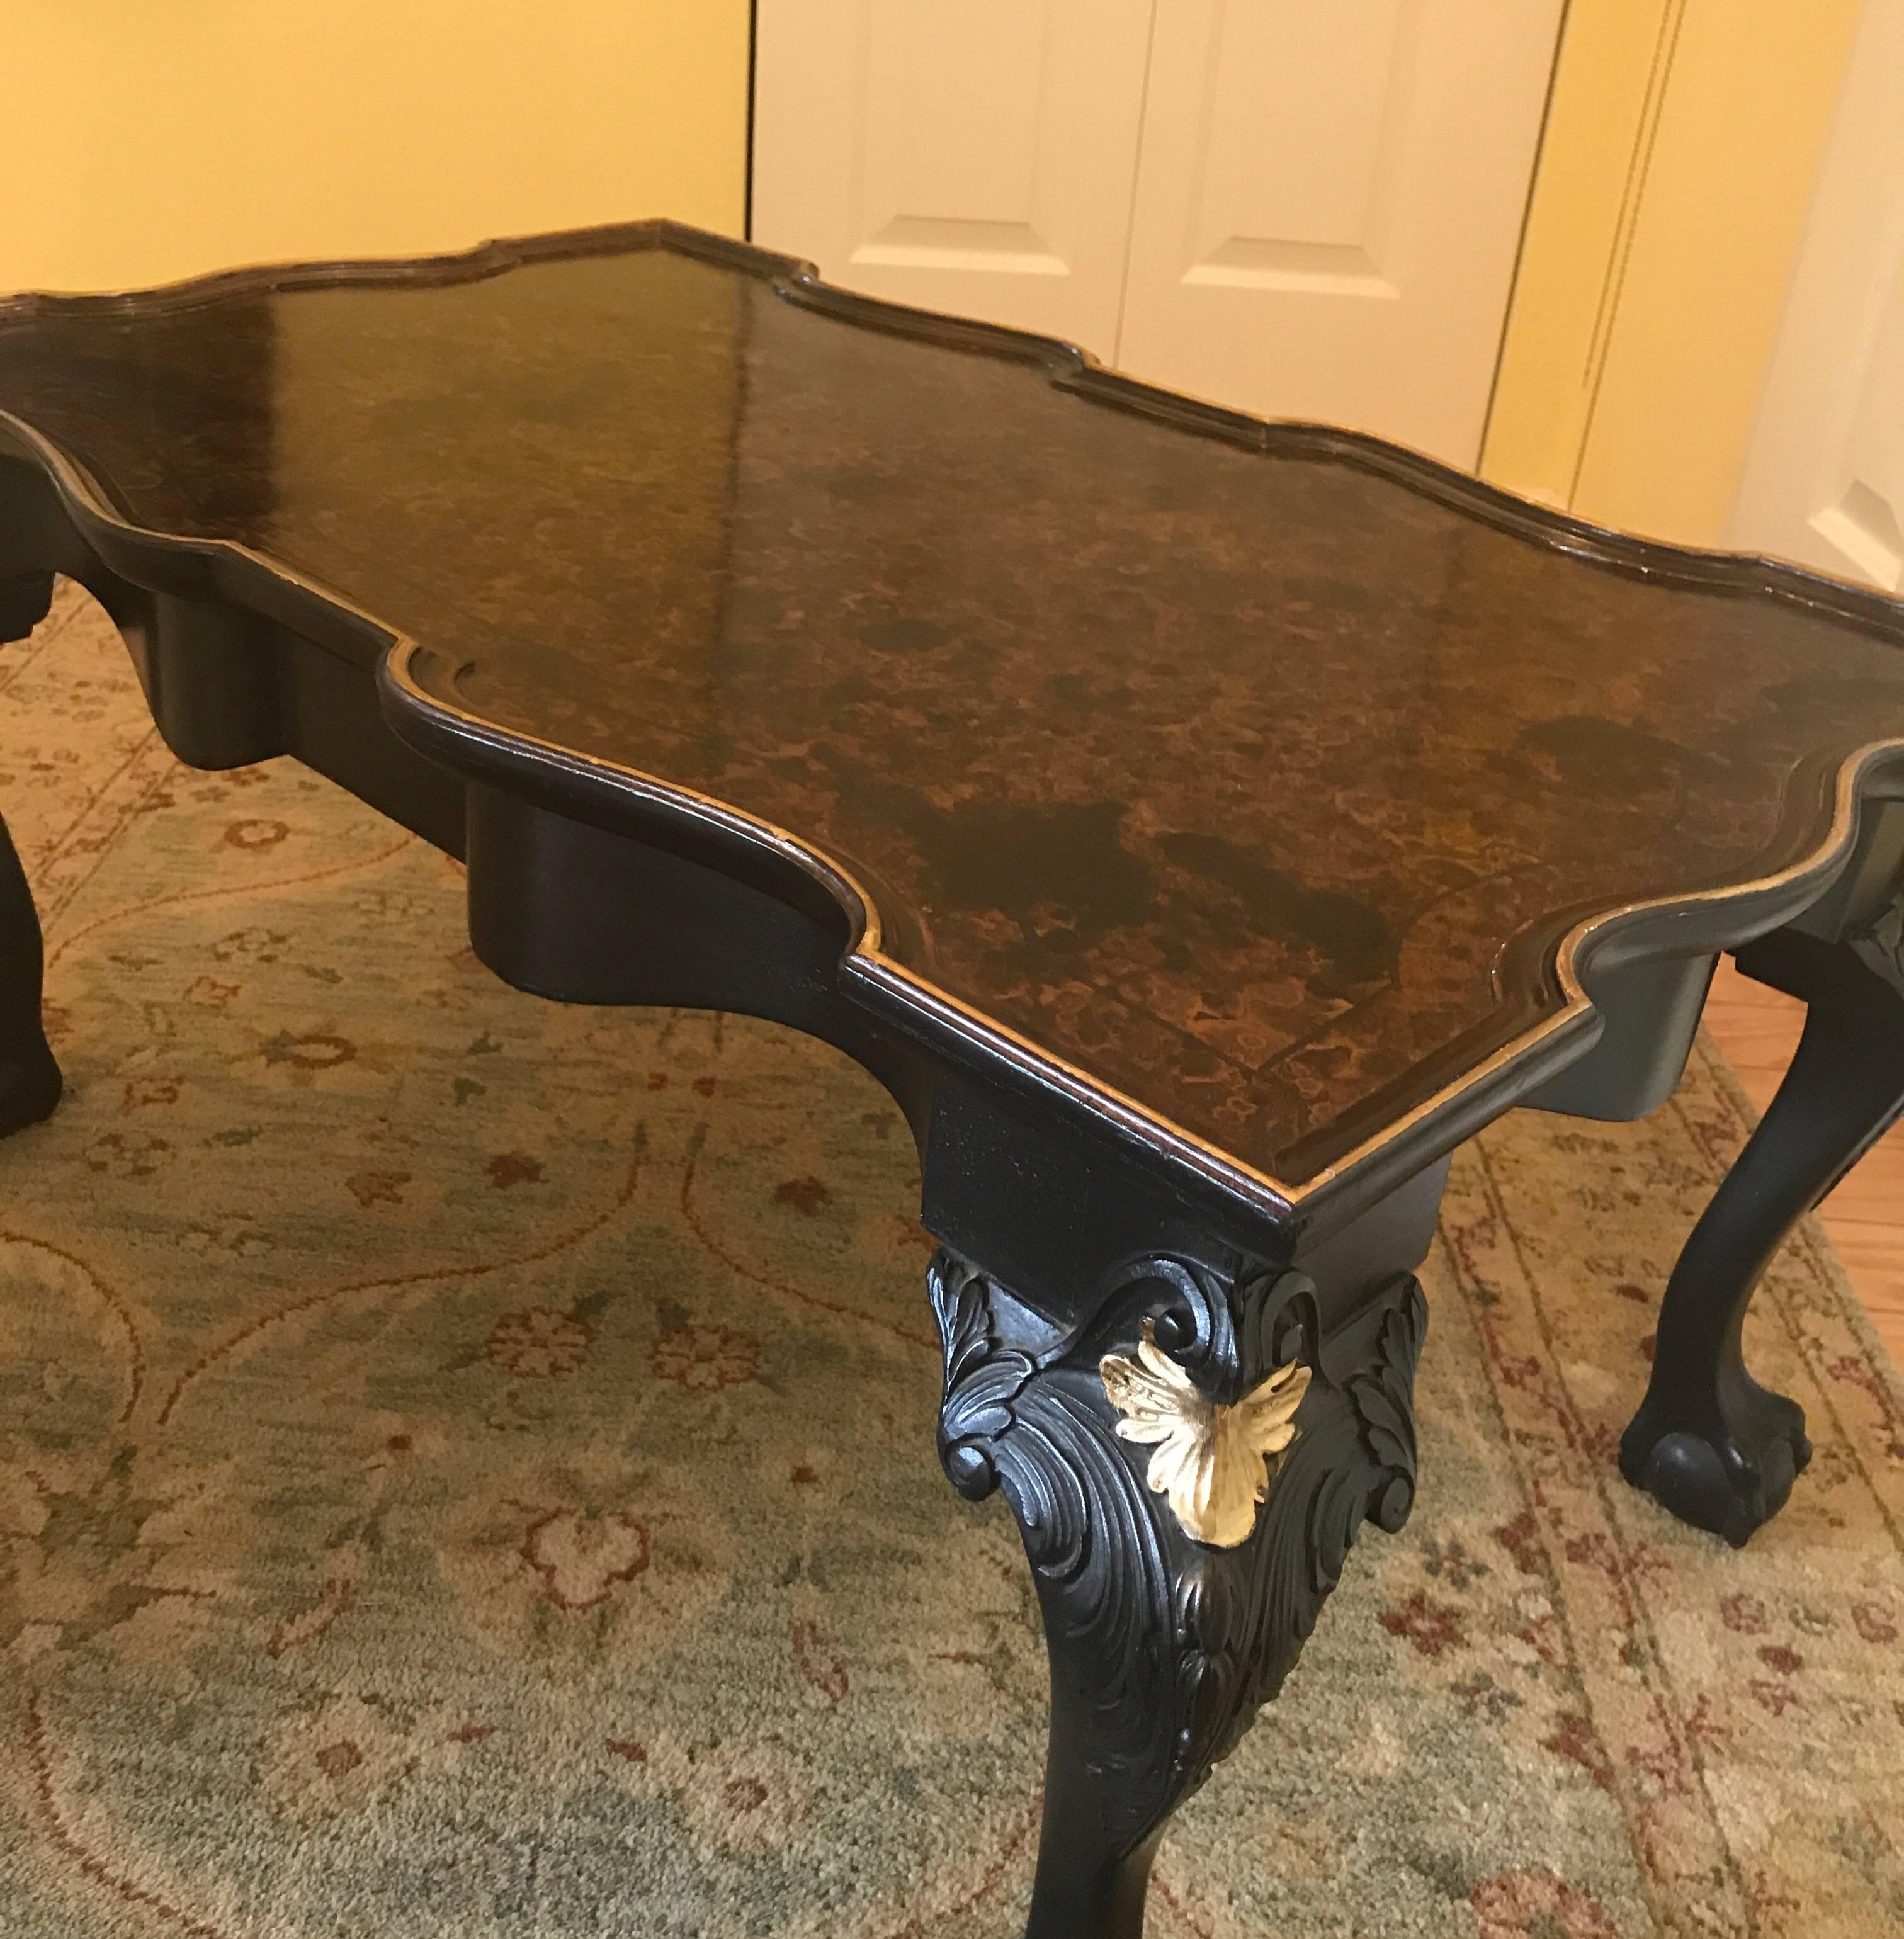 Elegant hand-carved ebonized wood tale with a faux tortoise shell top. The shapely scalloped shape with curved and carved legs with gilt shell in the top. The tortoise surface with gilt outline over nicely carved cabriole legs. 